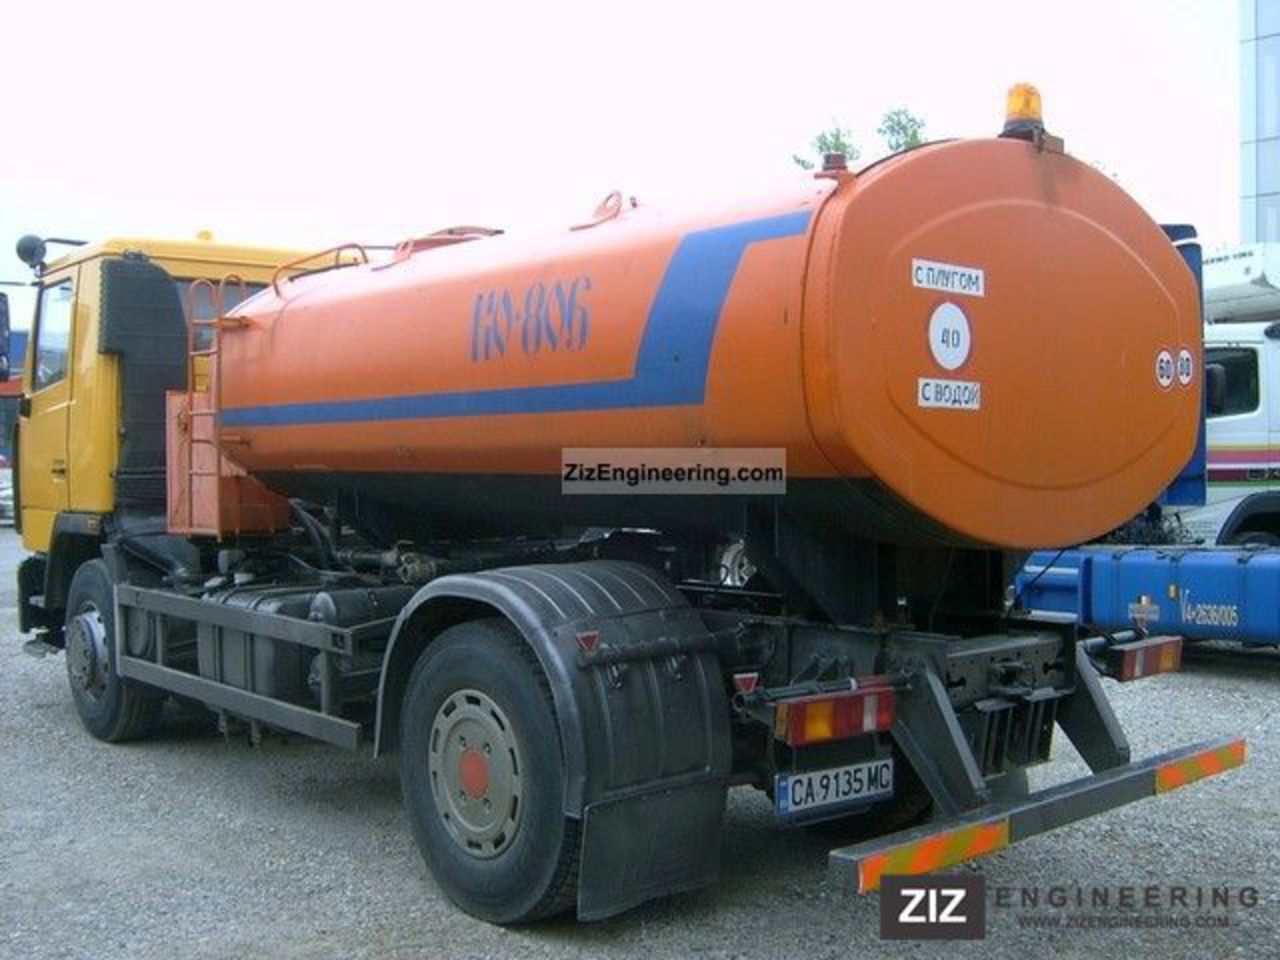 MAZ 5335 2008 Tank truck Photo and Specs